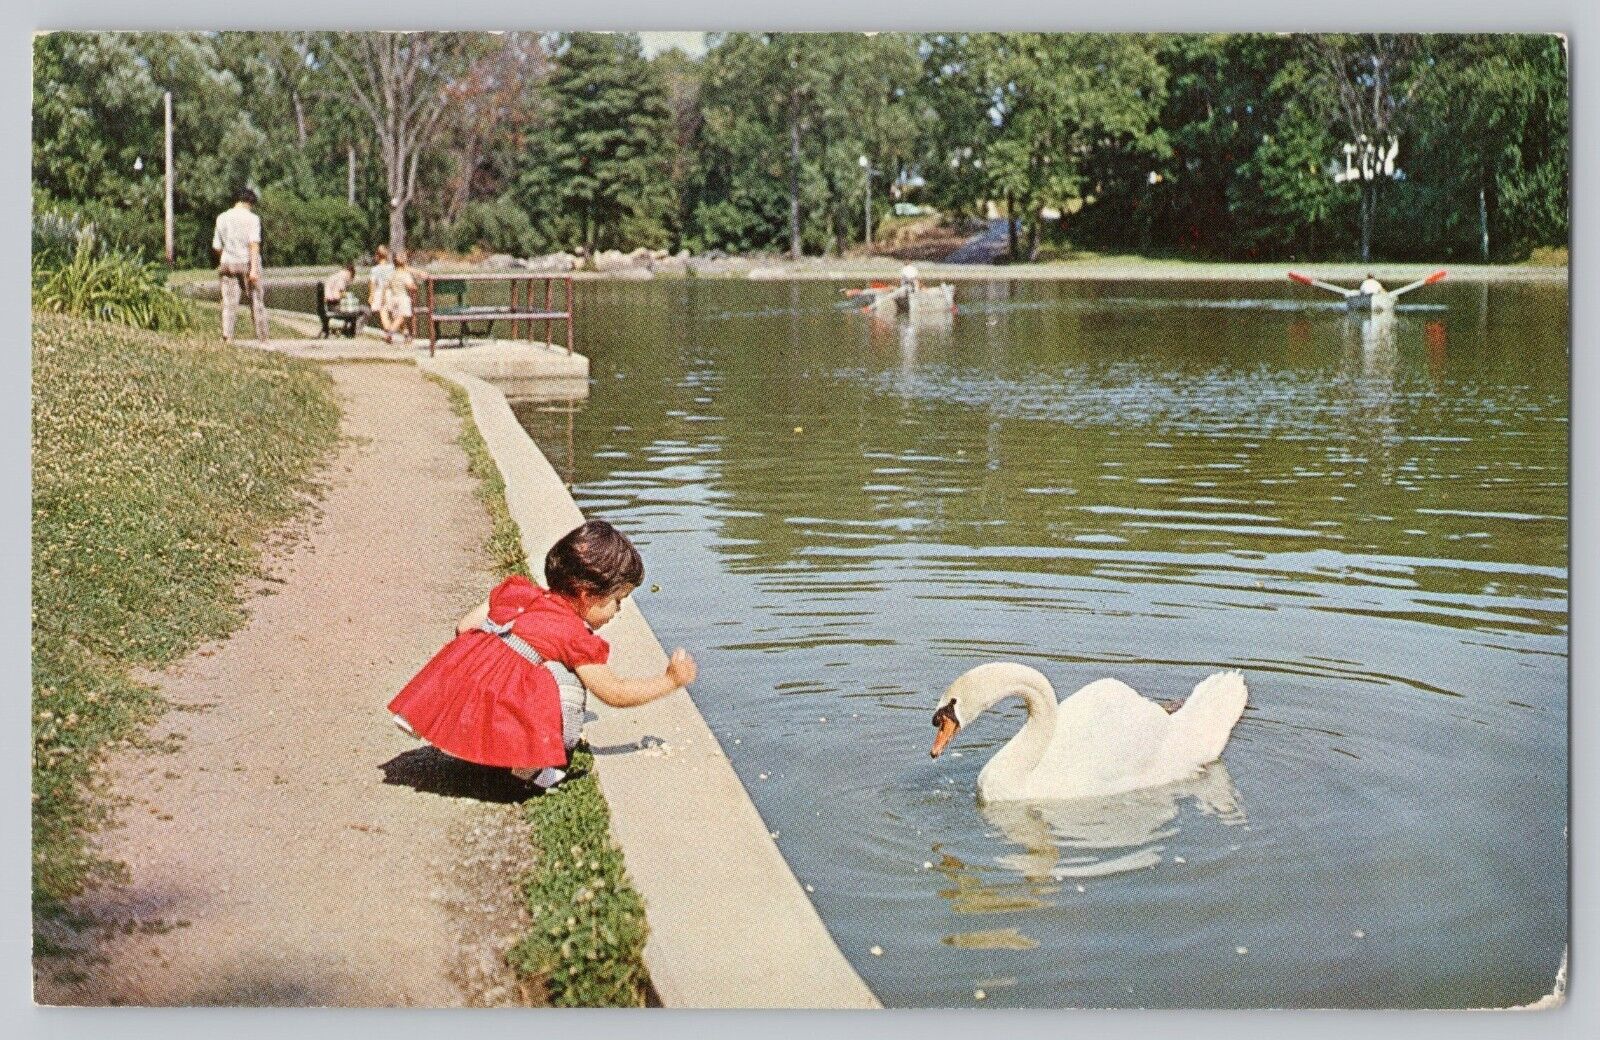 Louise and th Swan North Lake Park Mansfield Ohio Postcard 1960s View Chrome